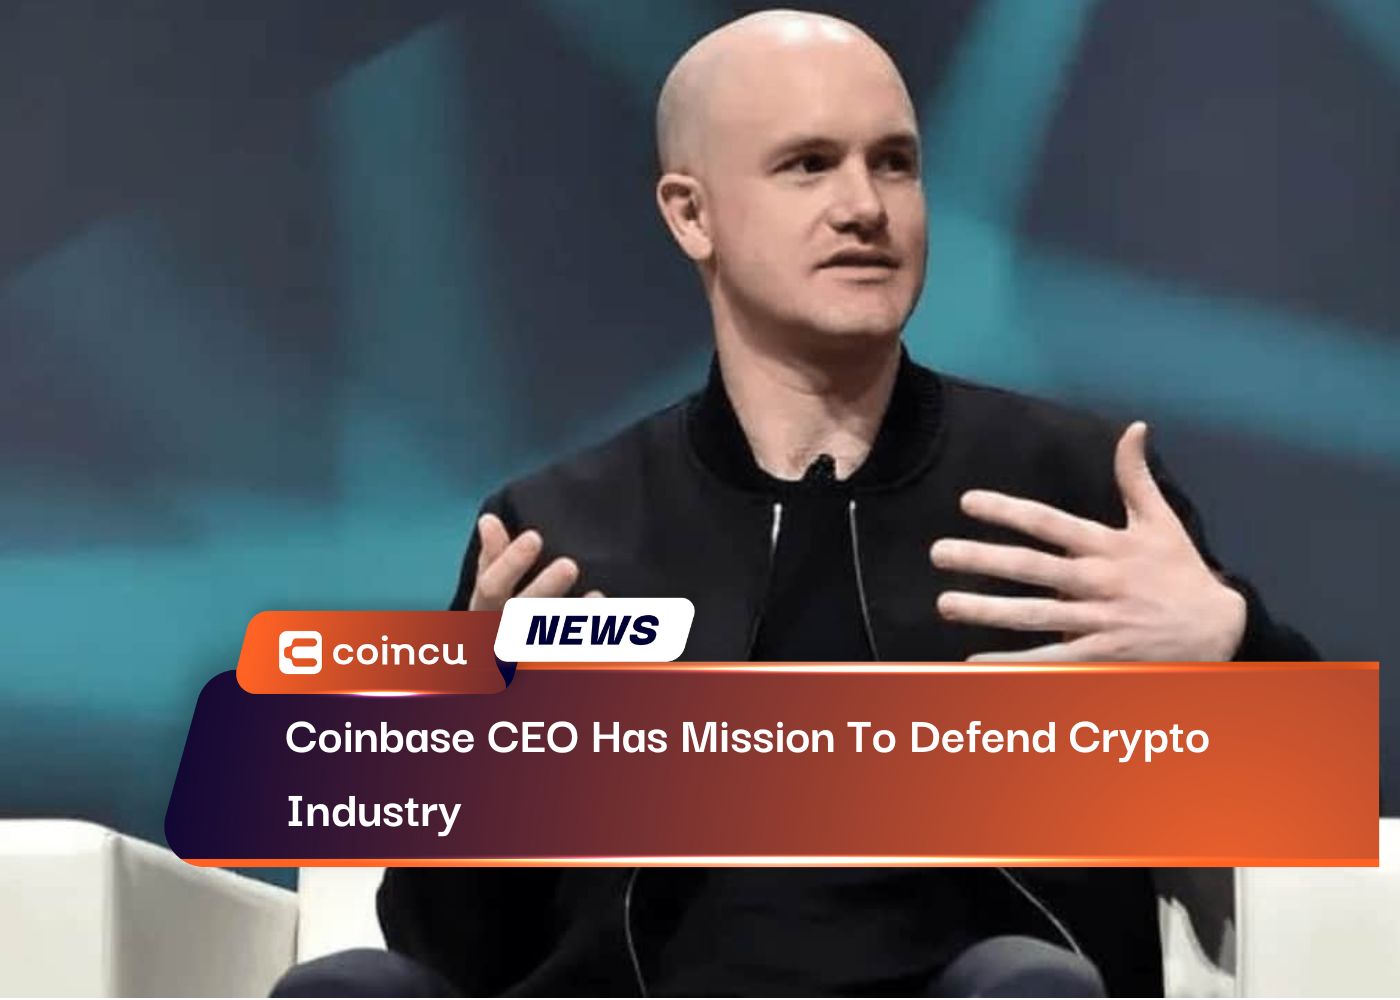 Coinbase CEO Has Mission To Defend Crypto Industry